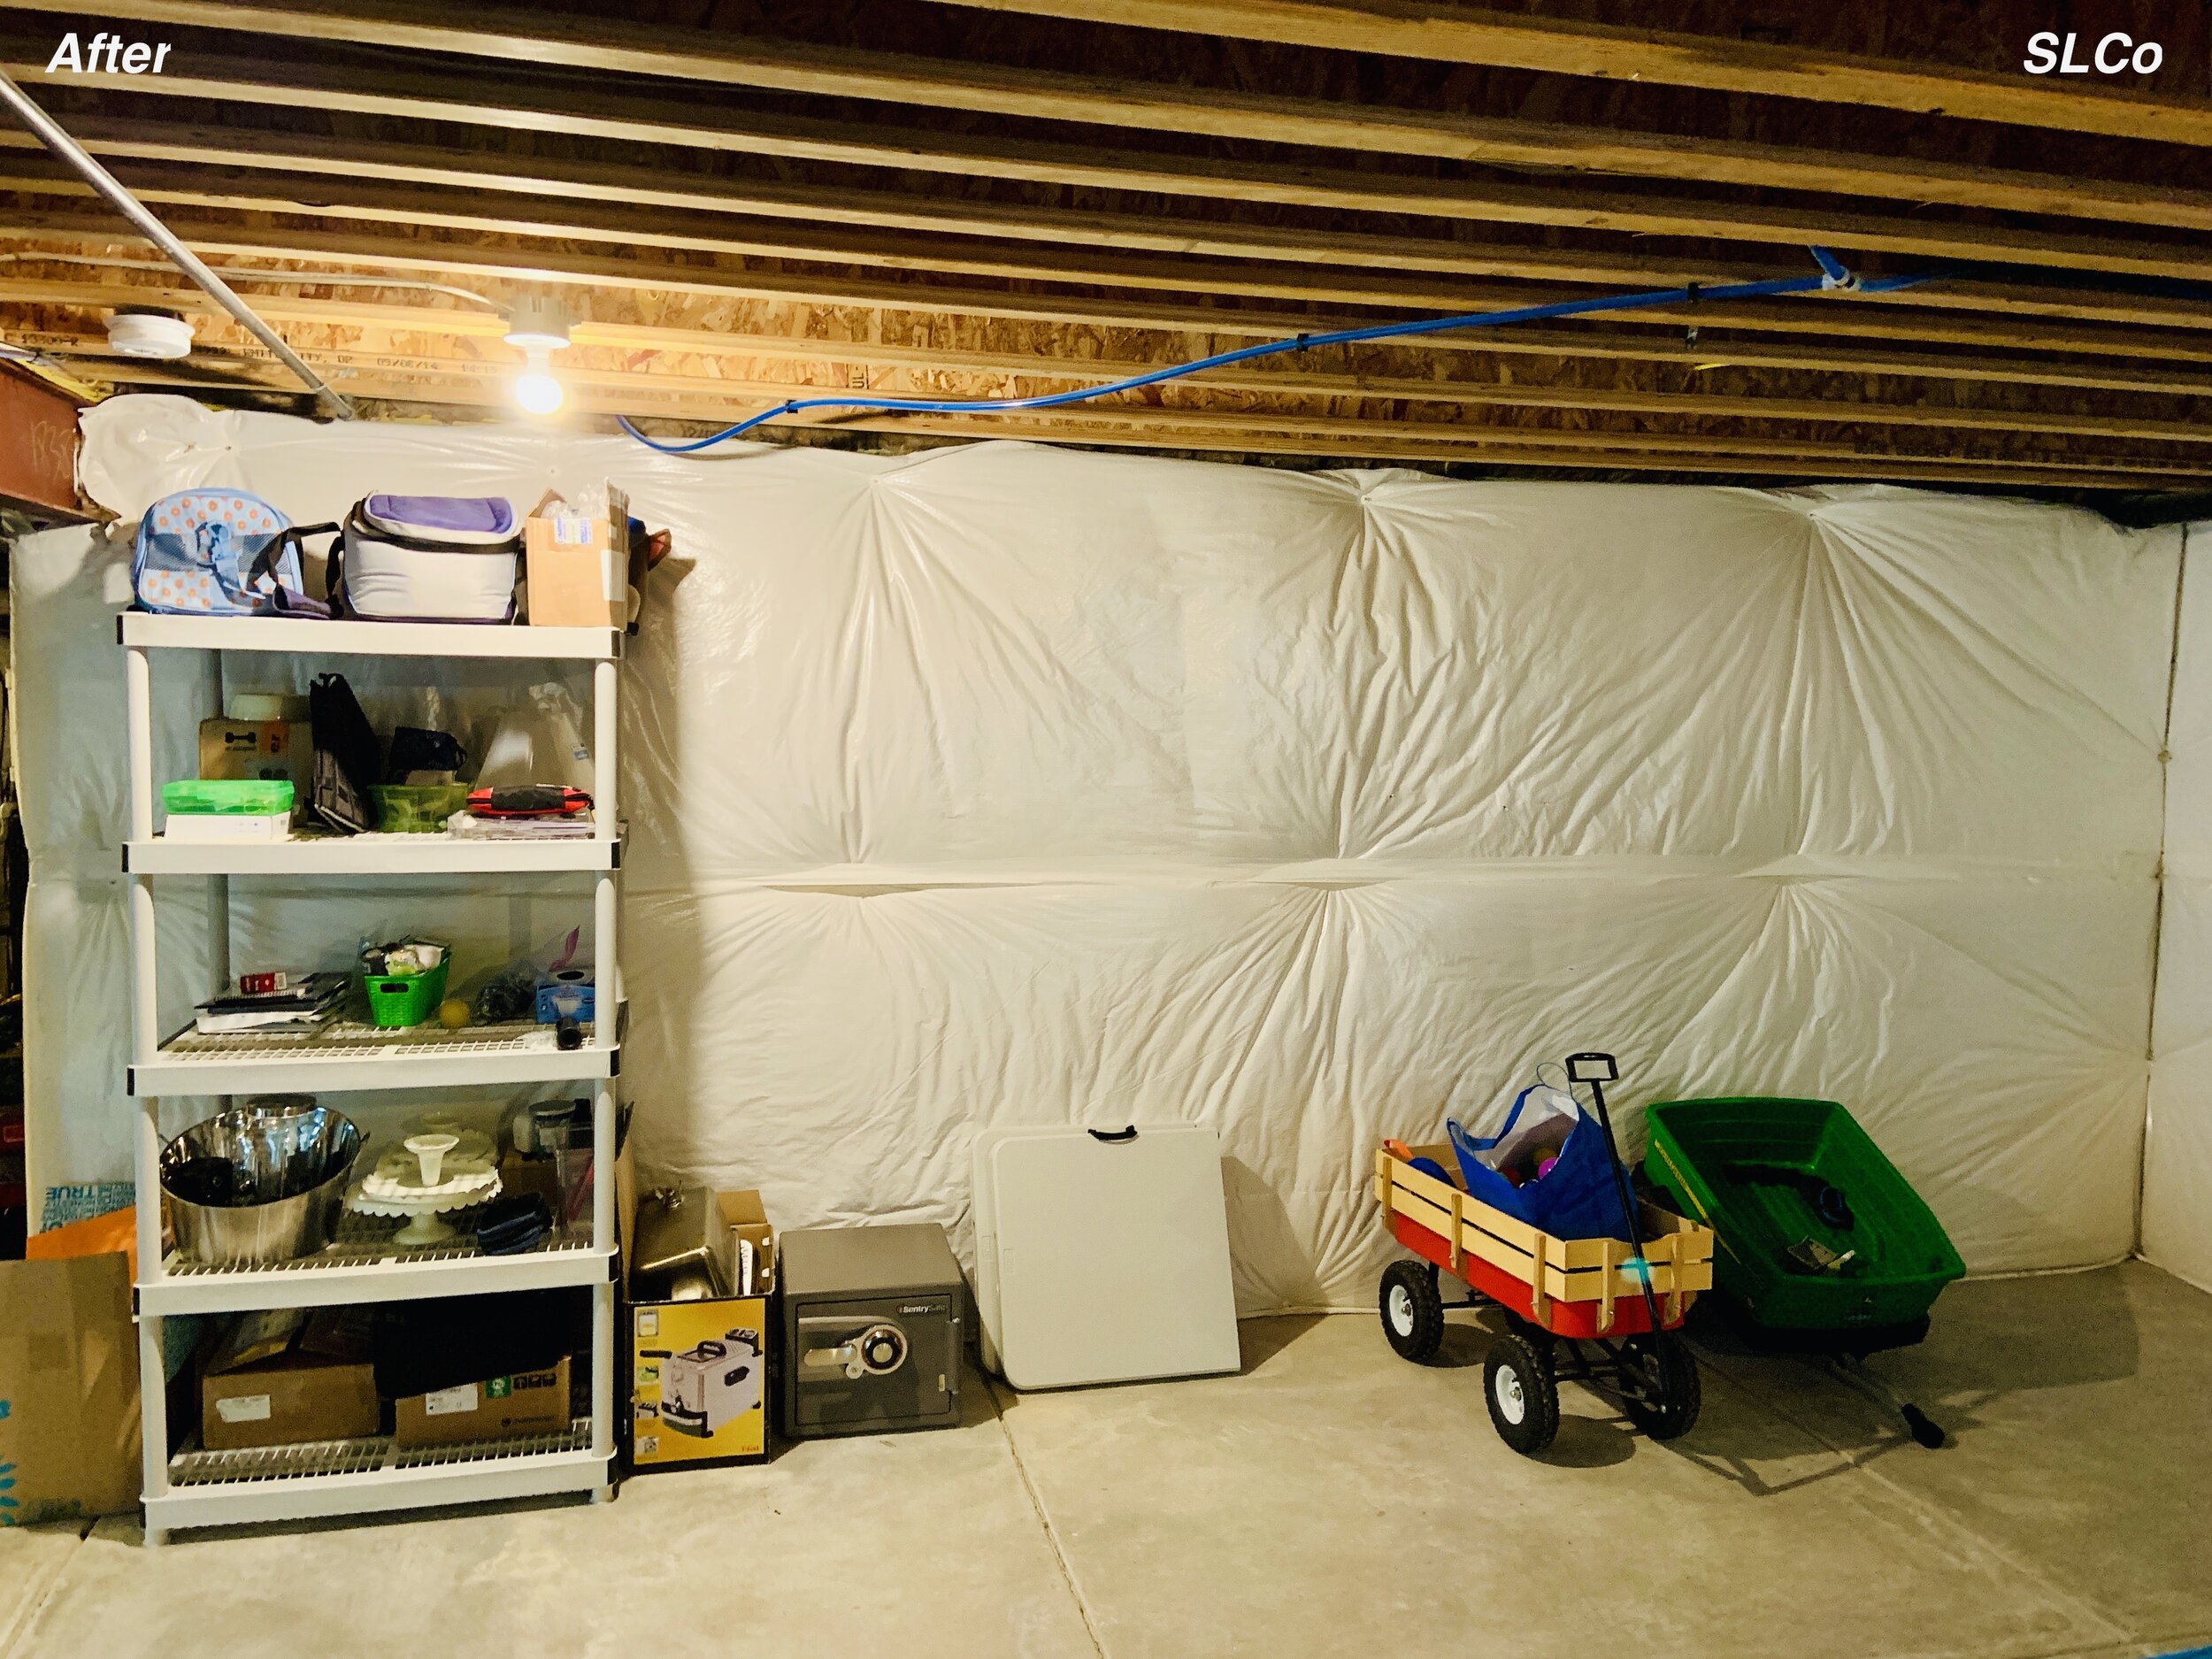 After photo of unfinished basement with white shelving unit with items organized on it and floor clear.